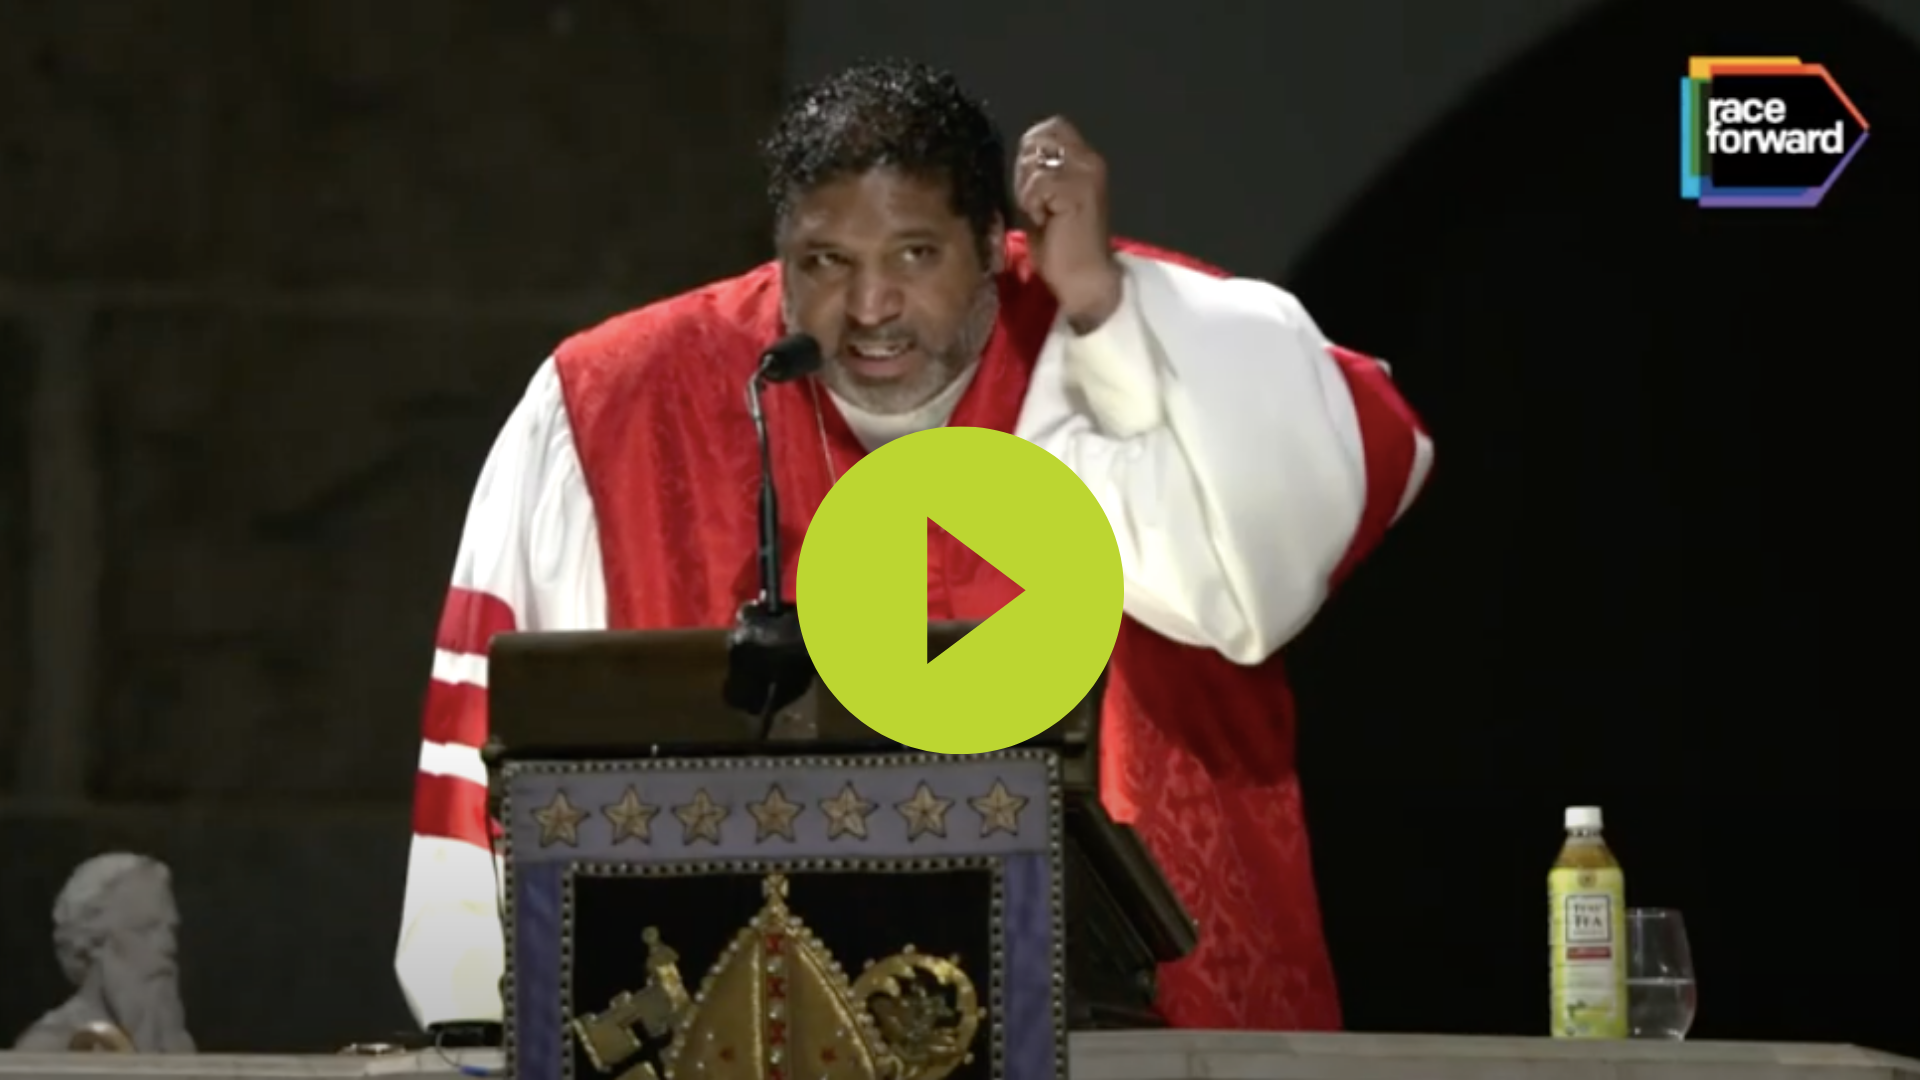 Watch the Rev. Dr. Barber announcement video!